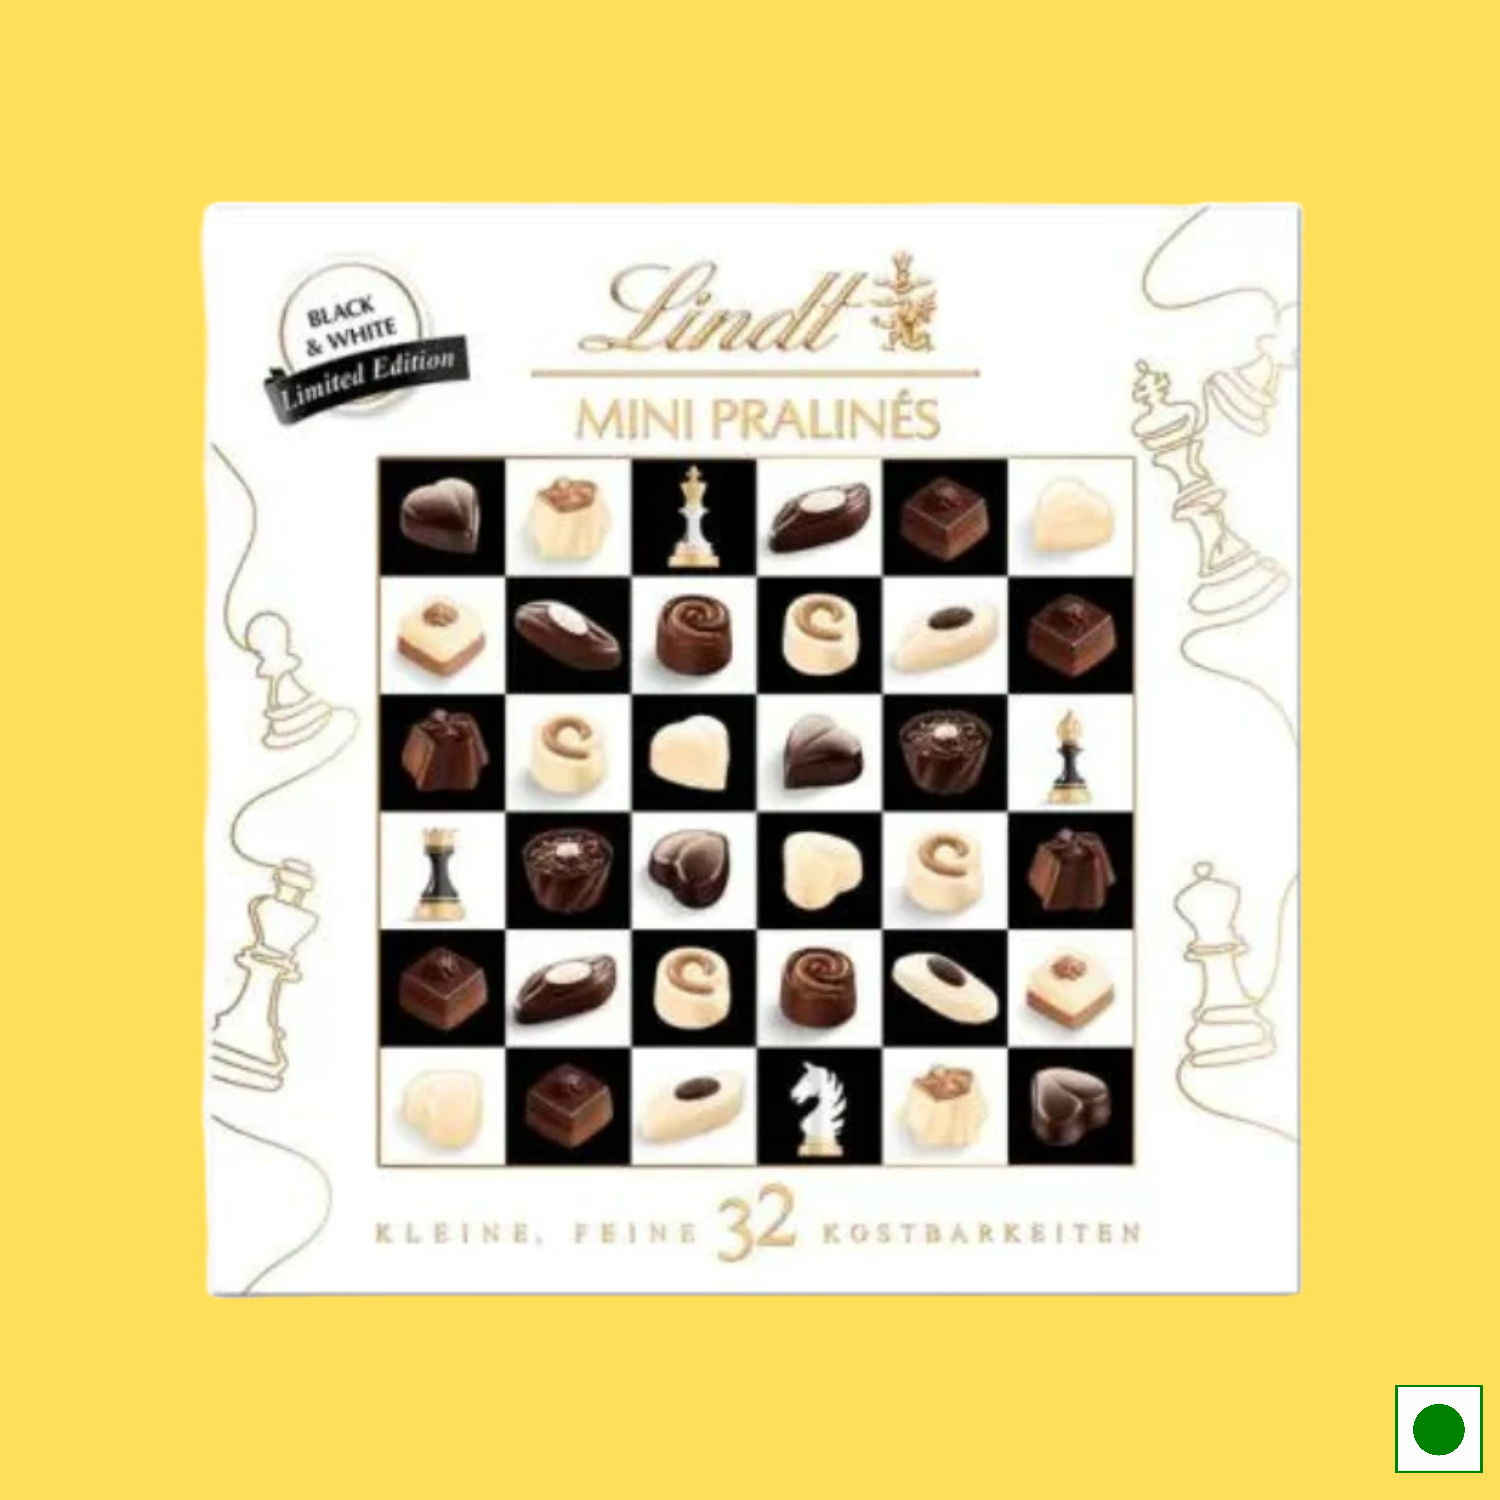 Lindt Limited Edition Mini Pralines Black & White, 163g (Imported)